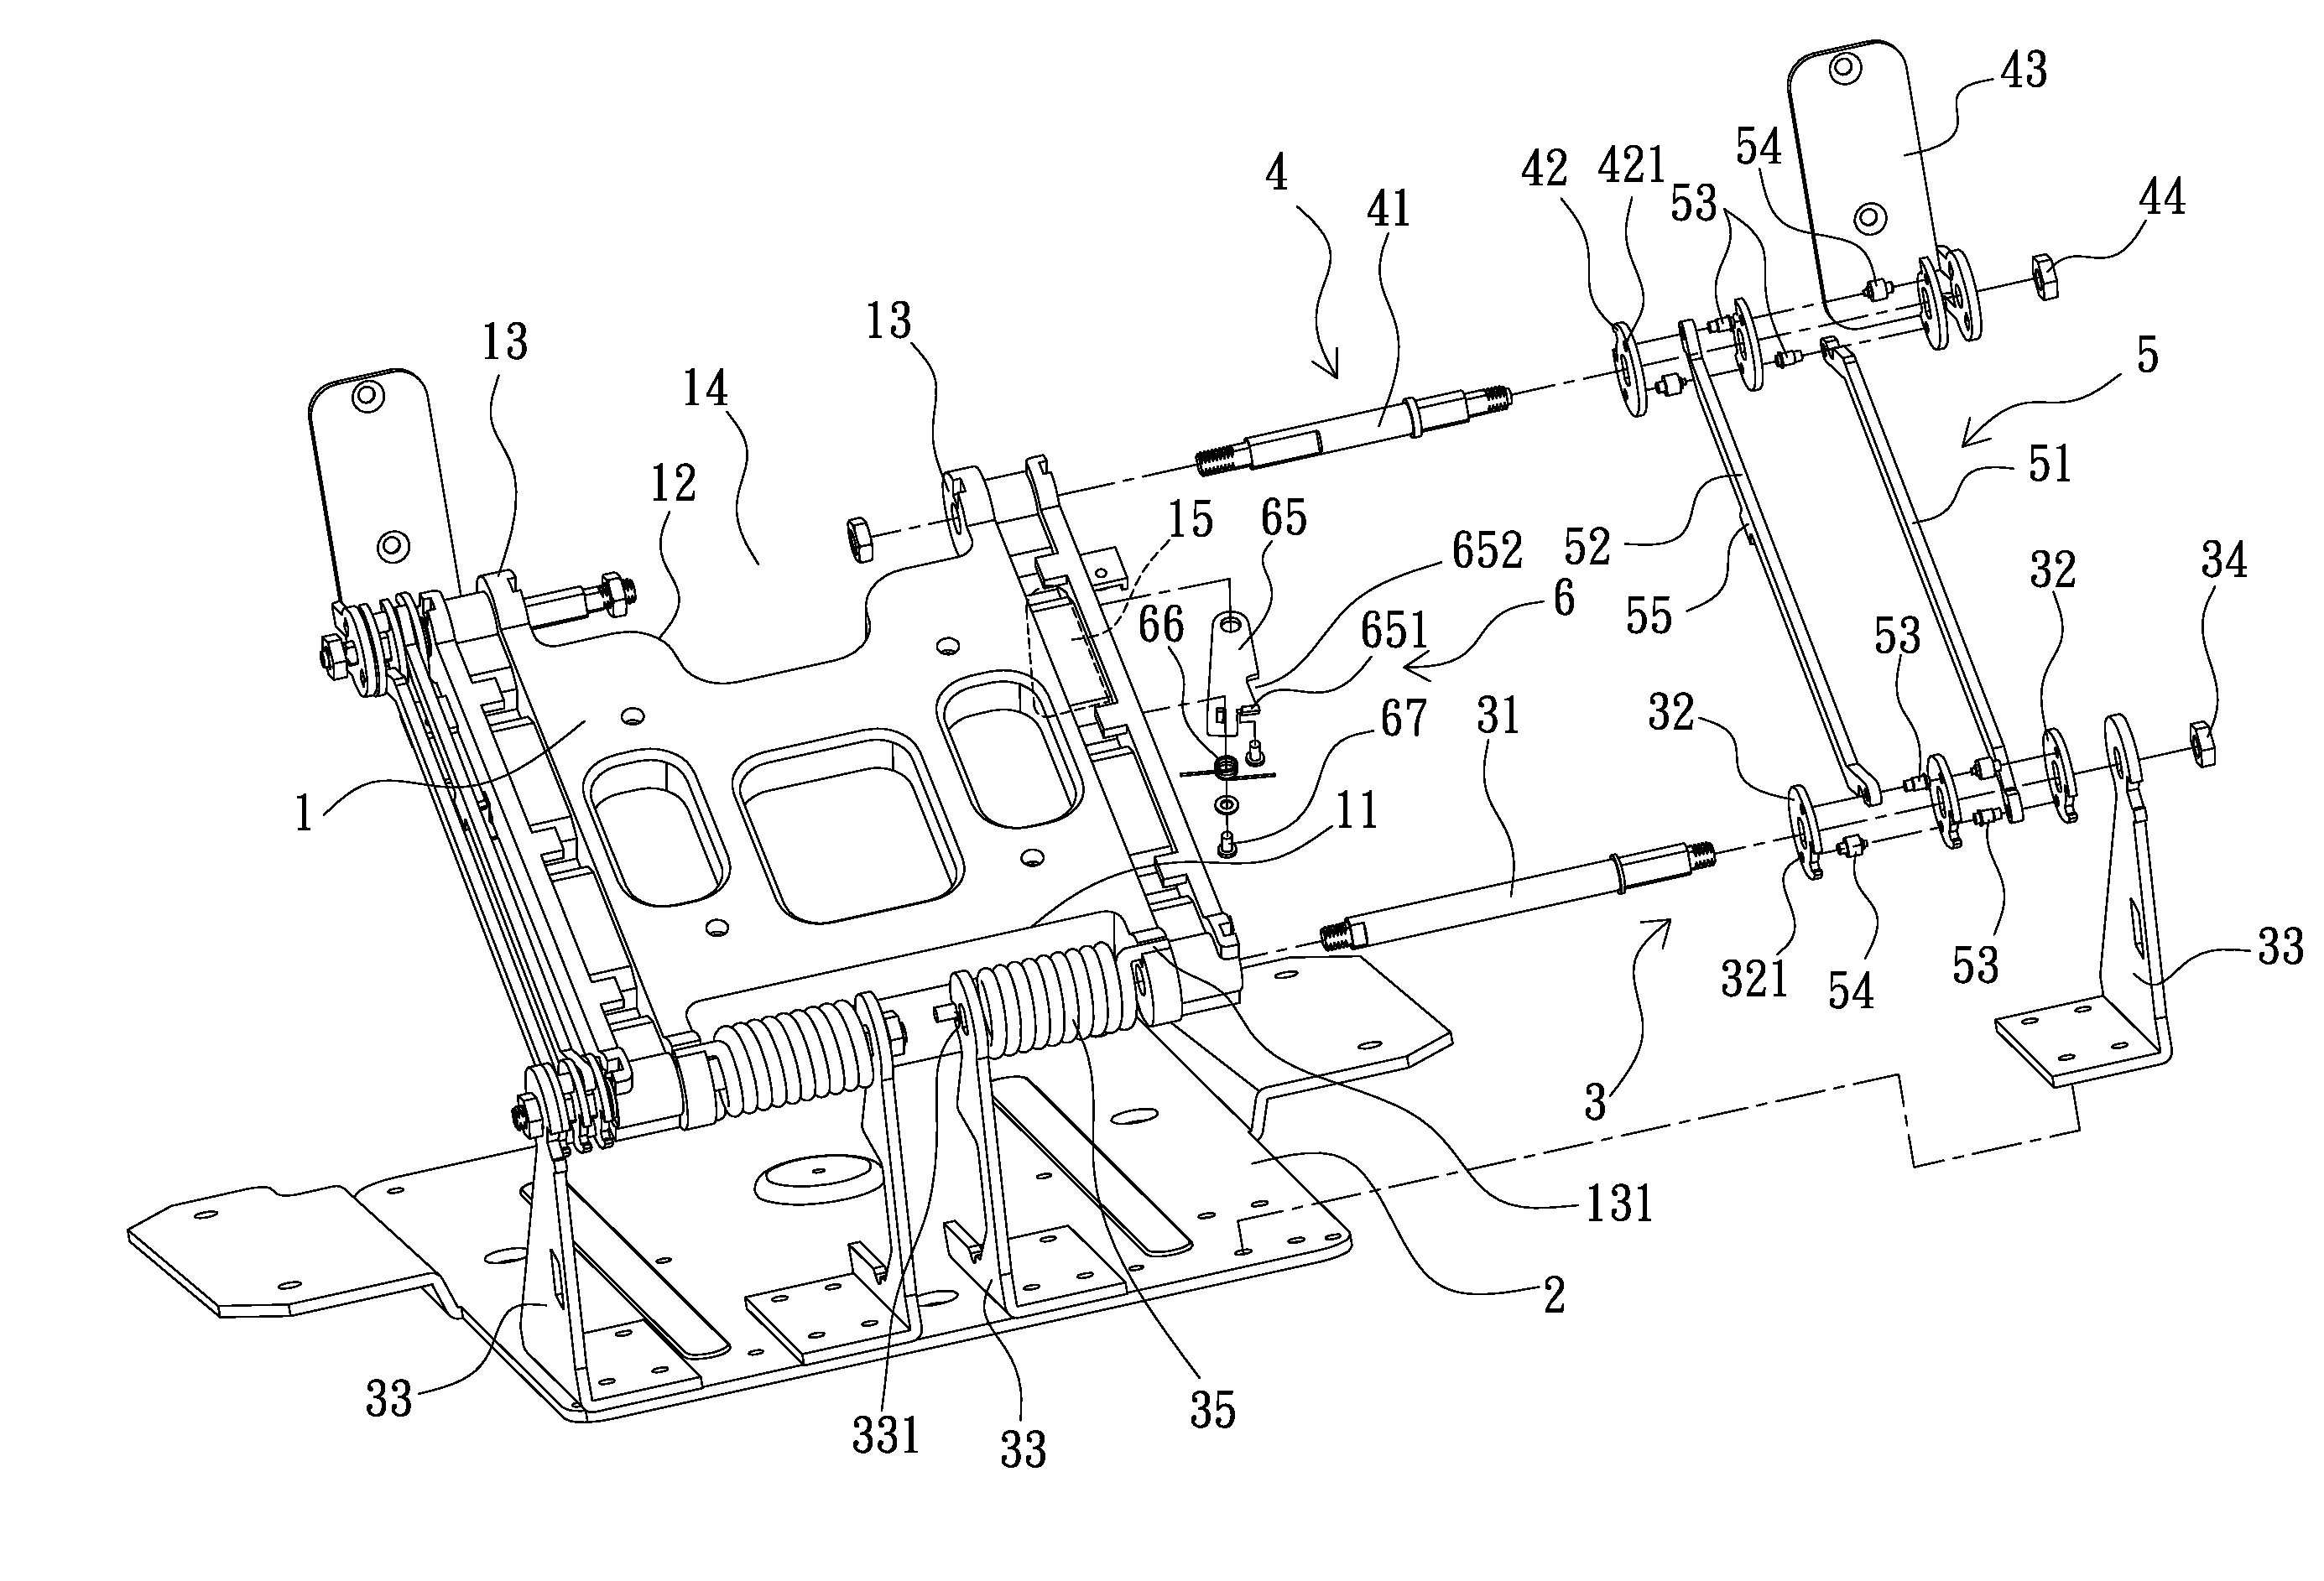 Supporting structure having function of rod-linkage latching